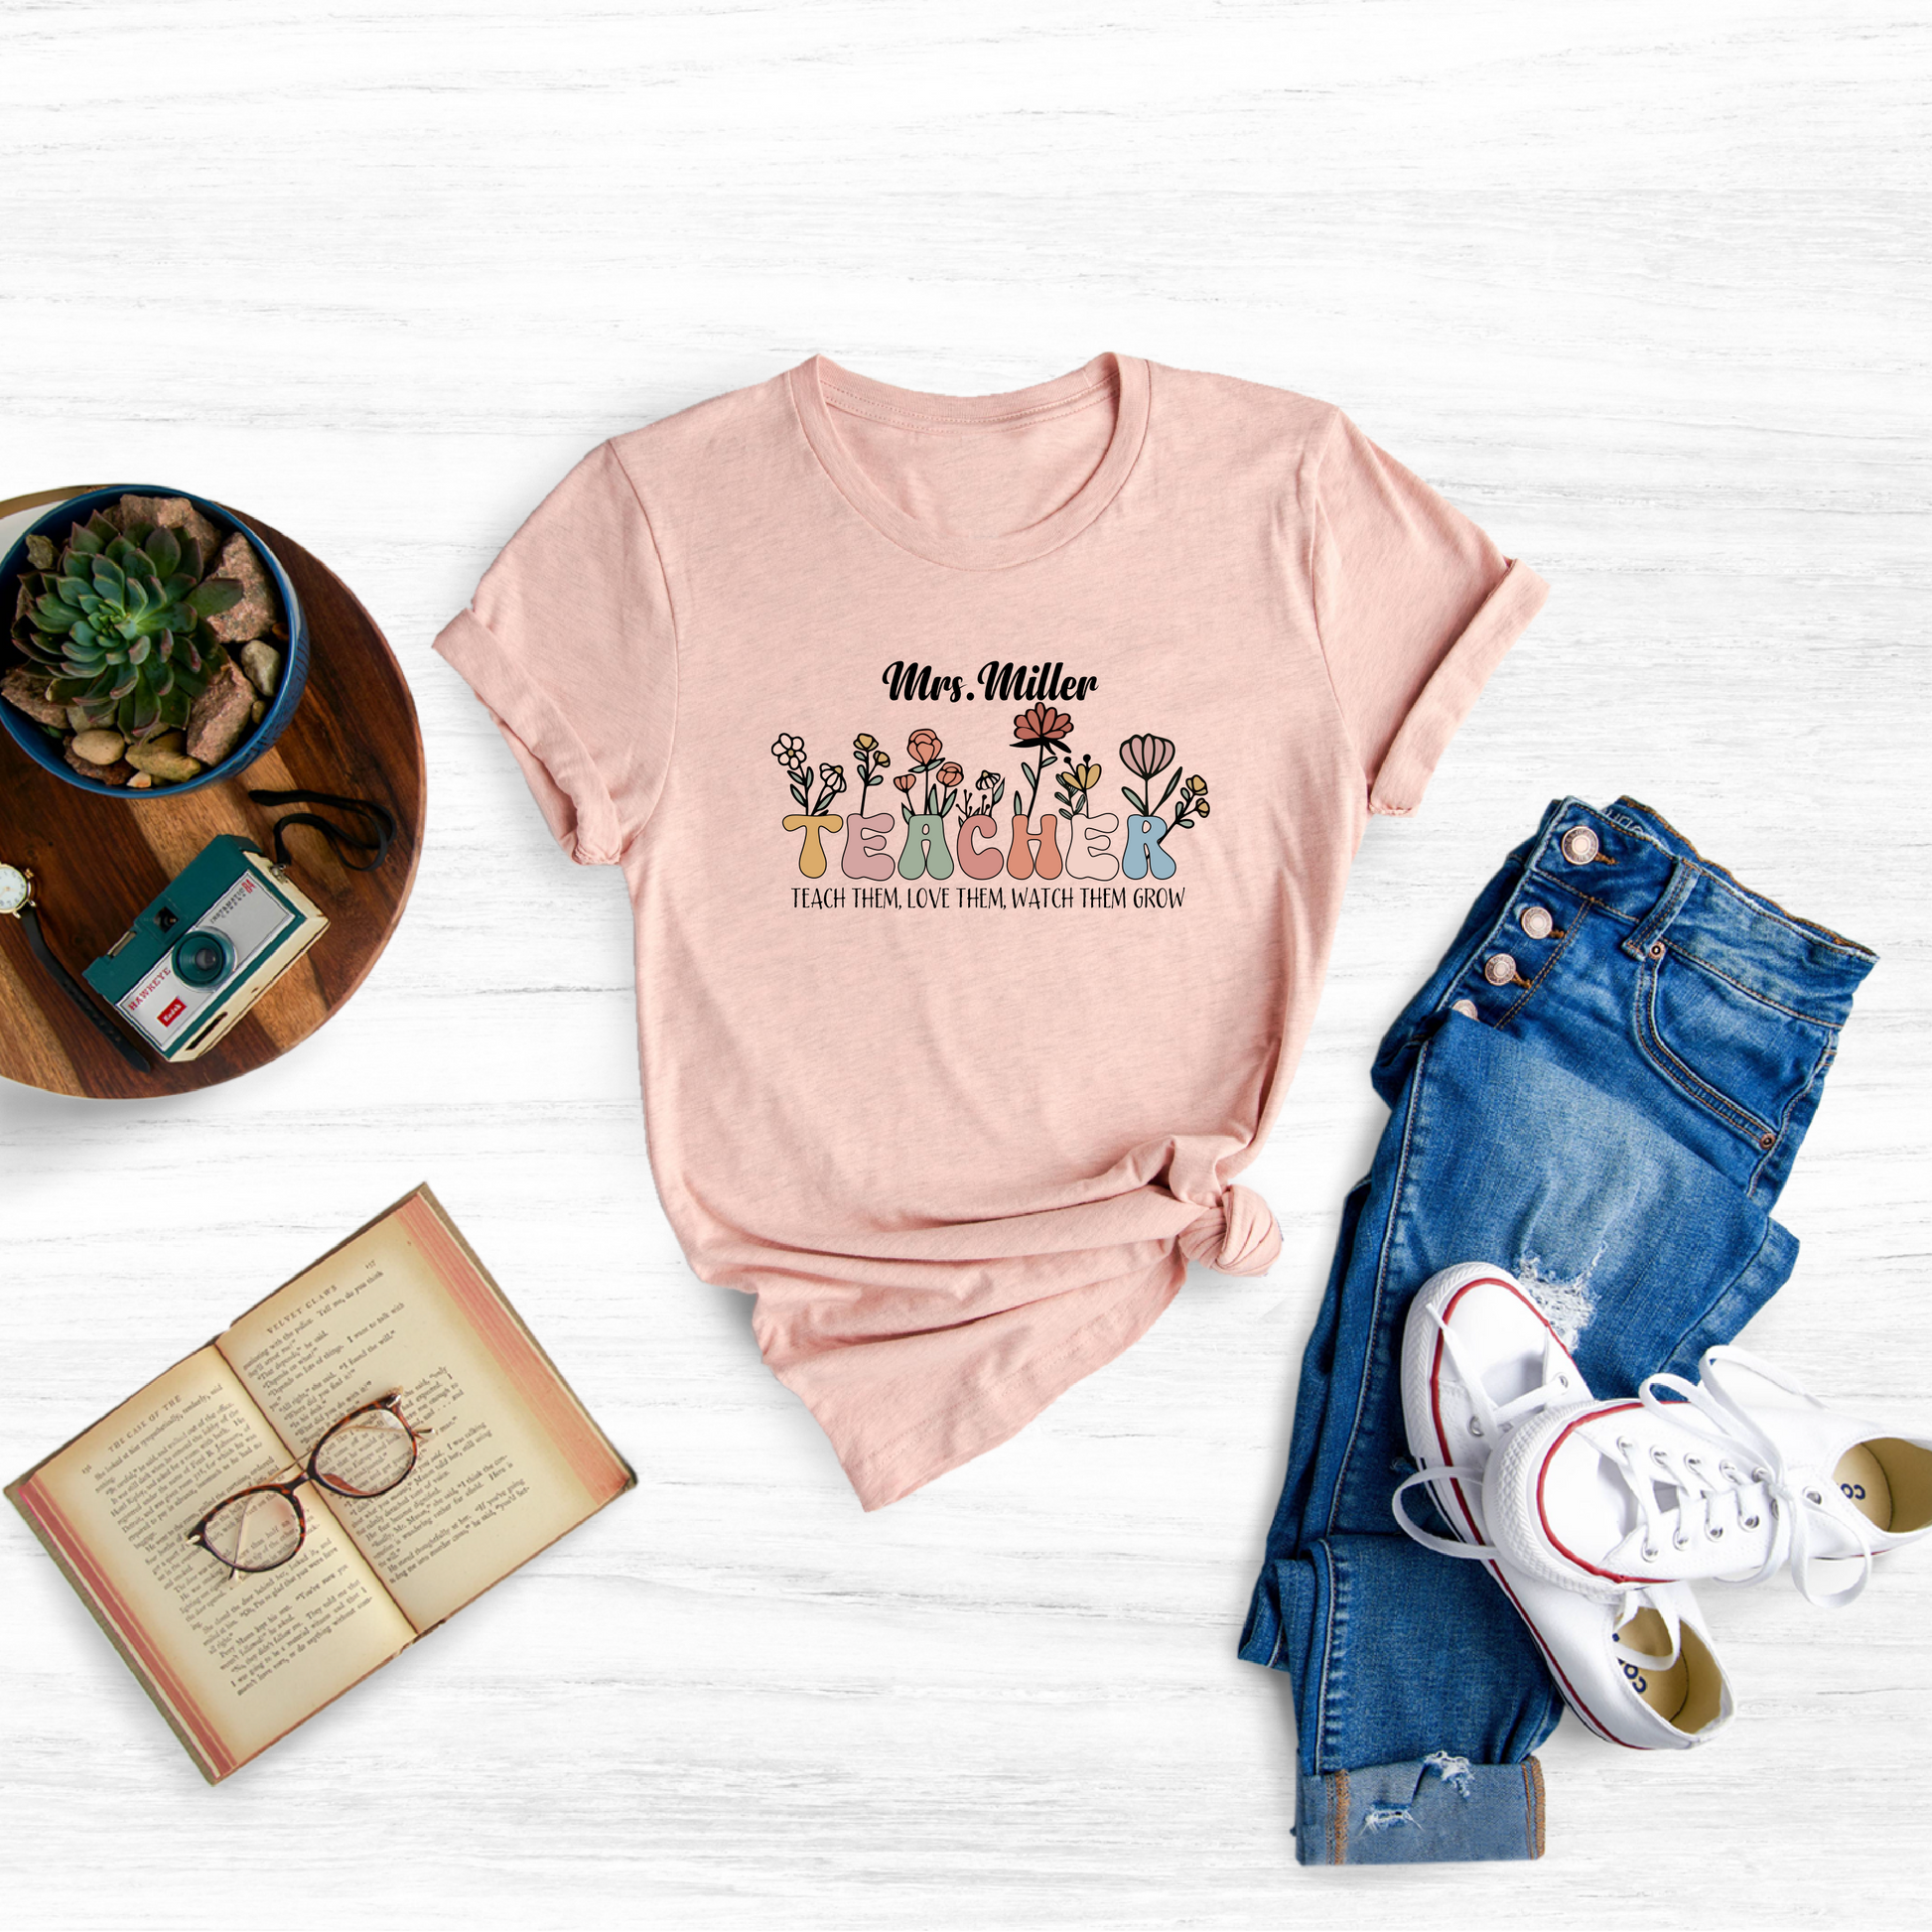 Celebrate the incredible educators who inspire and shape young minds with our personalized "Wildflower Teacher Name Shirt"